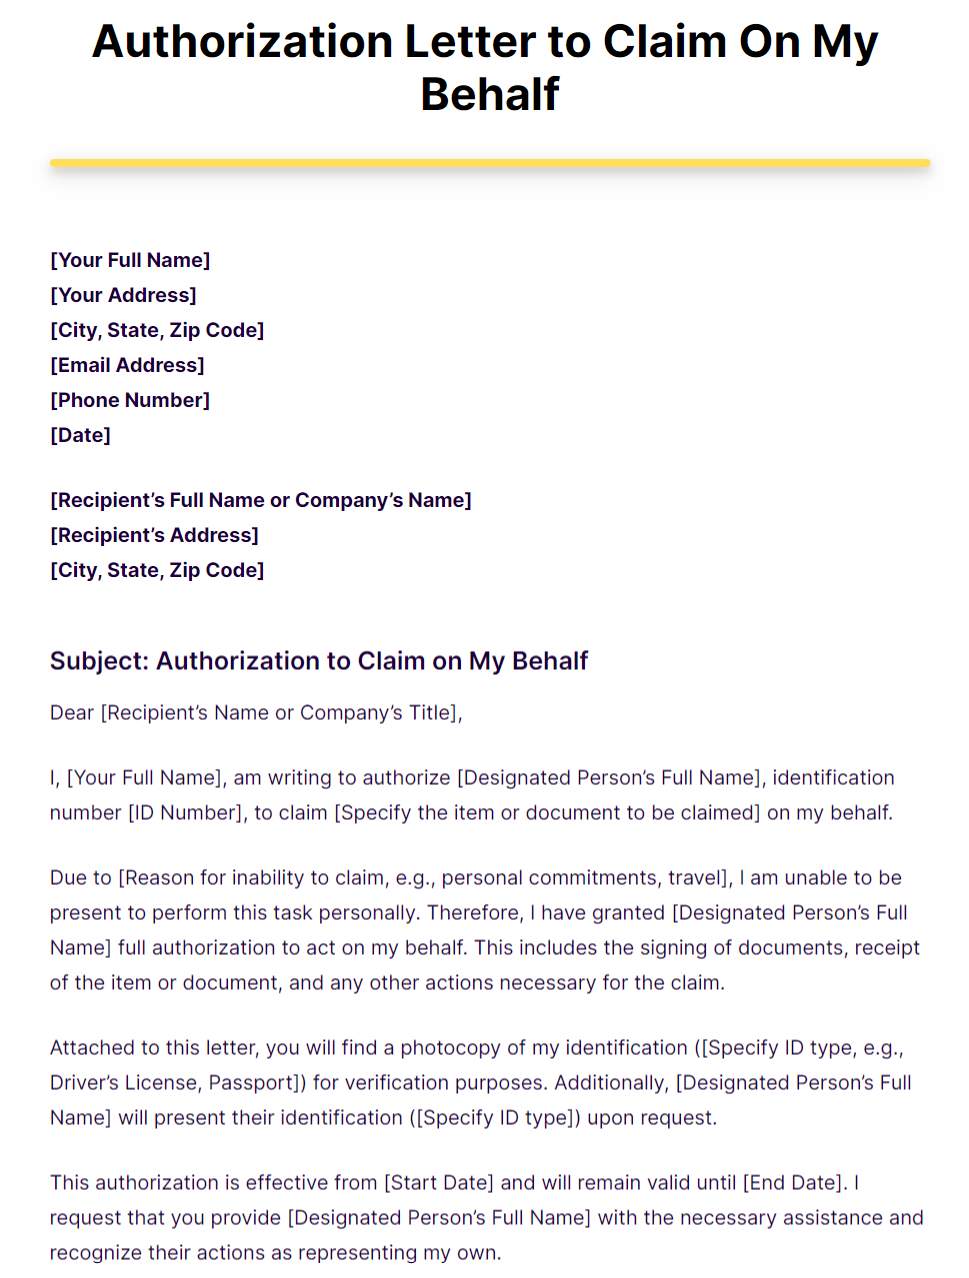 Authorization-Letter-Example-to-Claim-On-My-Behalf